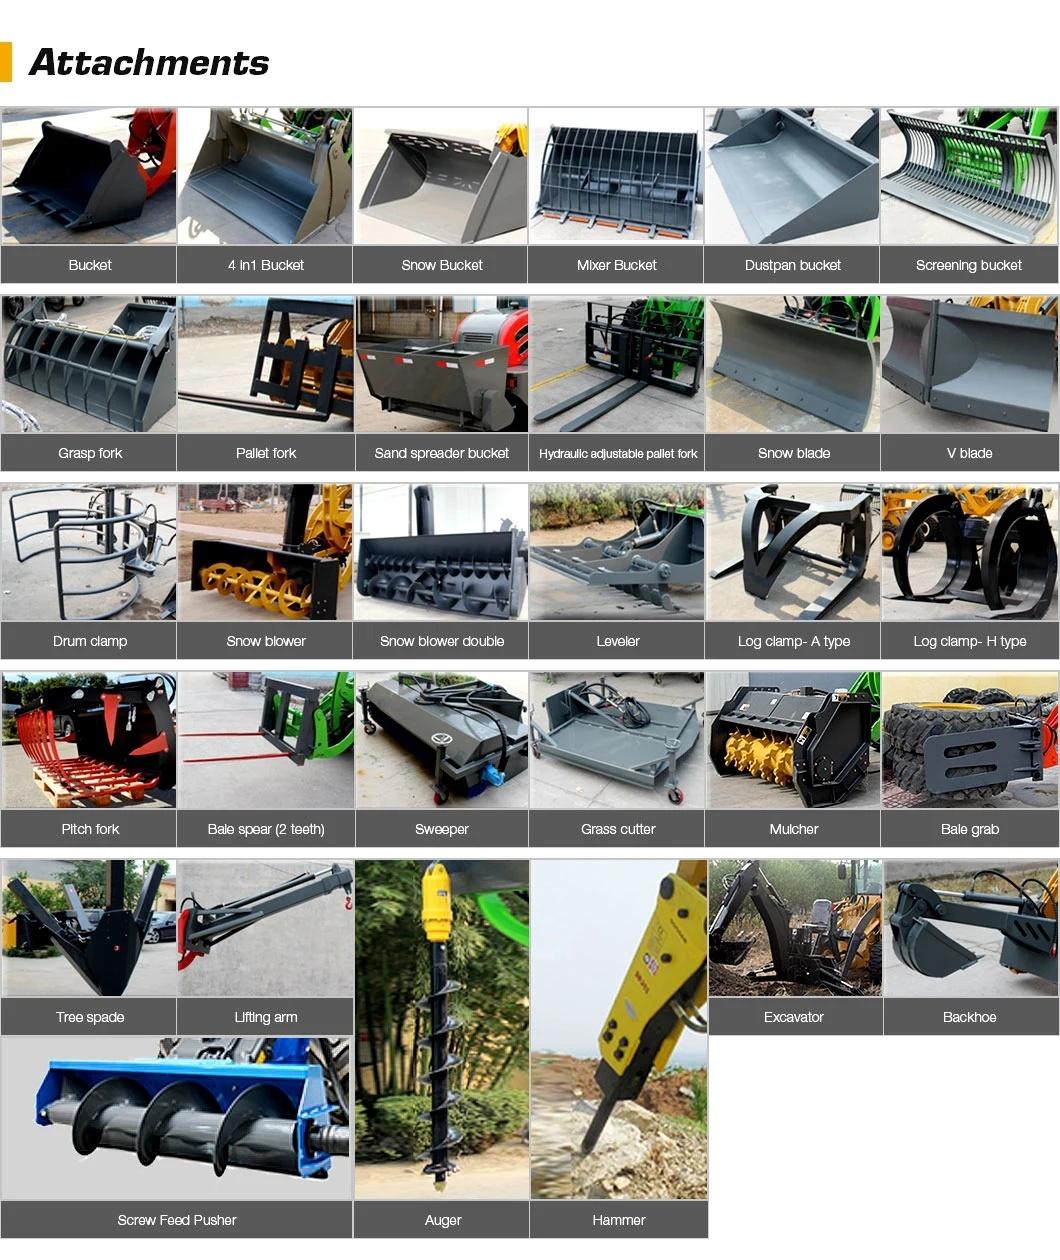 China Supplier Hzm Compact/Articulated/Multifunctional with CE/Euro 5/Bagger Radlader Bucket/Fork/Attachments/Cab/Rops/Roll Bar 811 Mini Loader for Sales/Garden